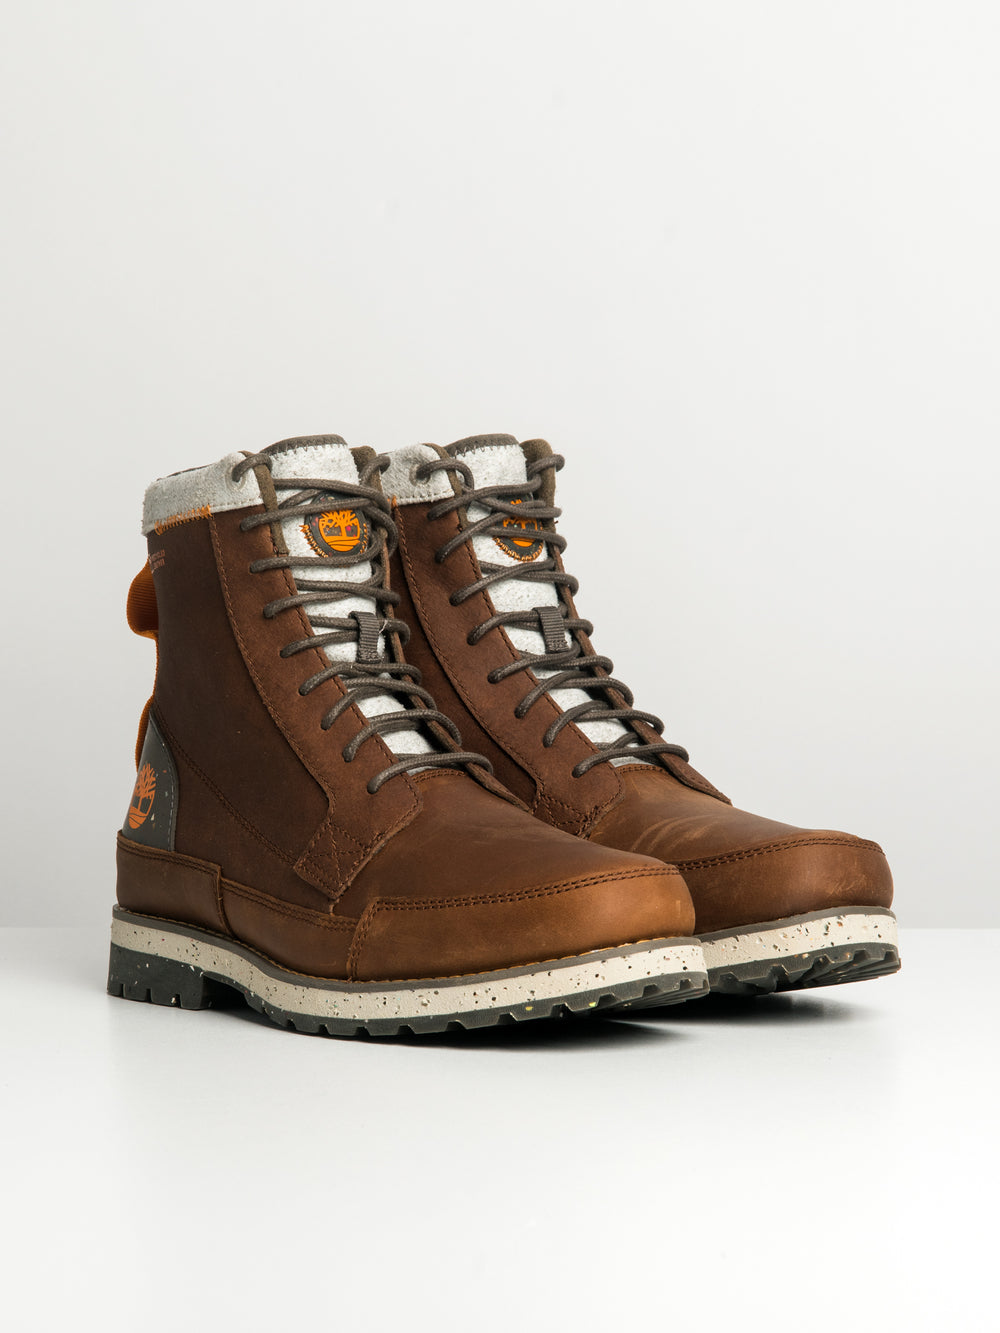 BOTTES TIMBERLAND TIMBERCYCLE POUR HOMMES - LIQUIDATION